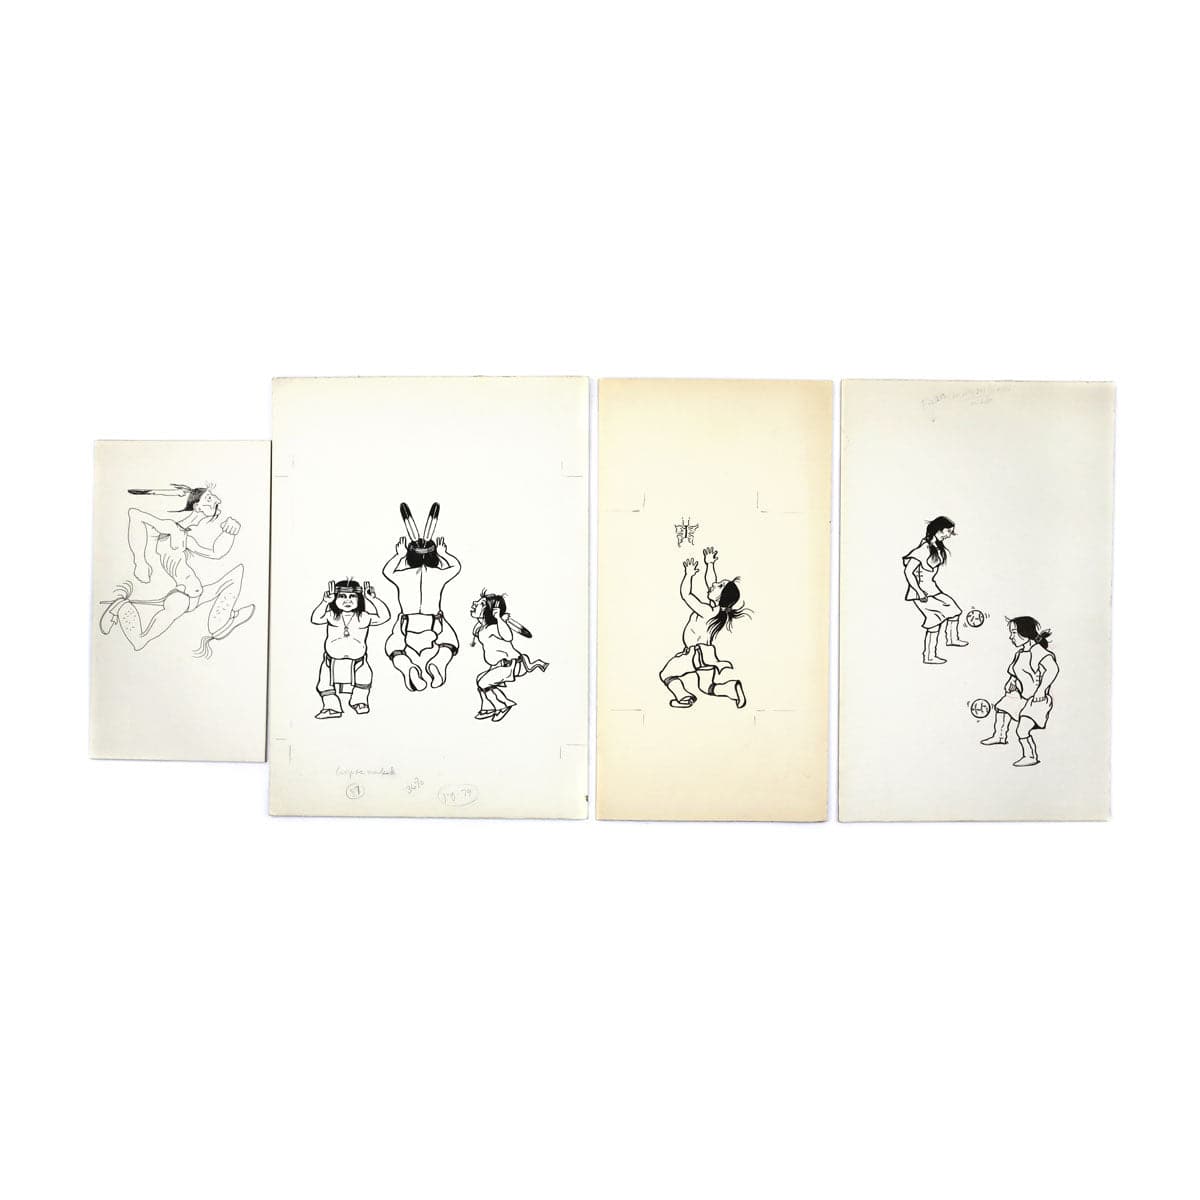 Group of 56 Original Kiowa Drawings, 120 Anko Calendar Drawings, and 13 Vinyl Records of Songs Arranged and Sung by Various Singers of the Southern and Northern Plains Tribes (M90218C-0621-001)8